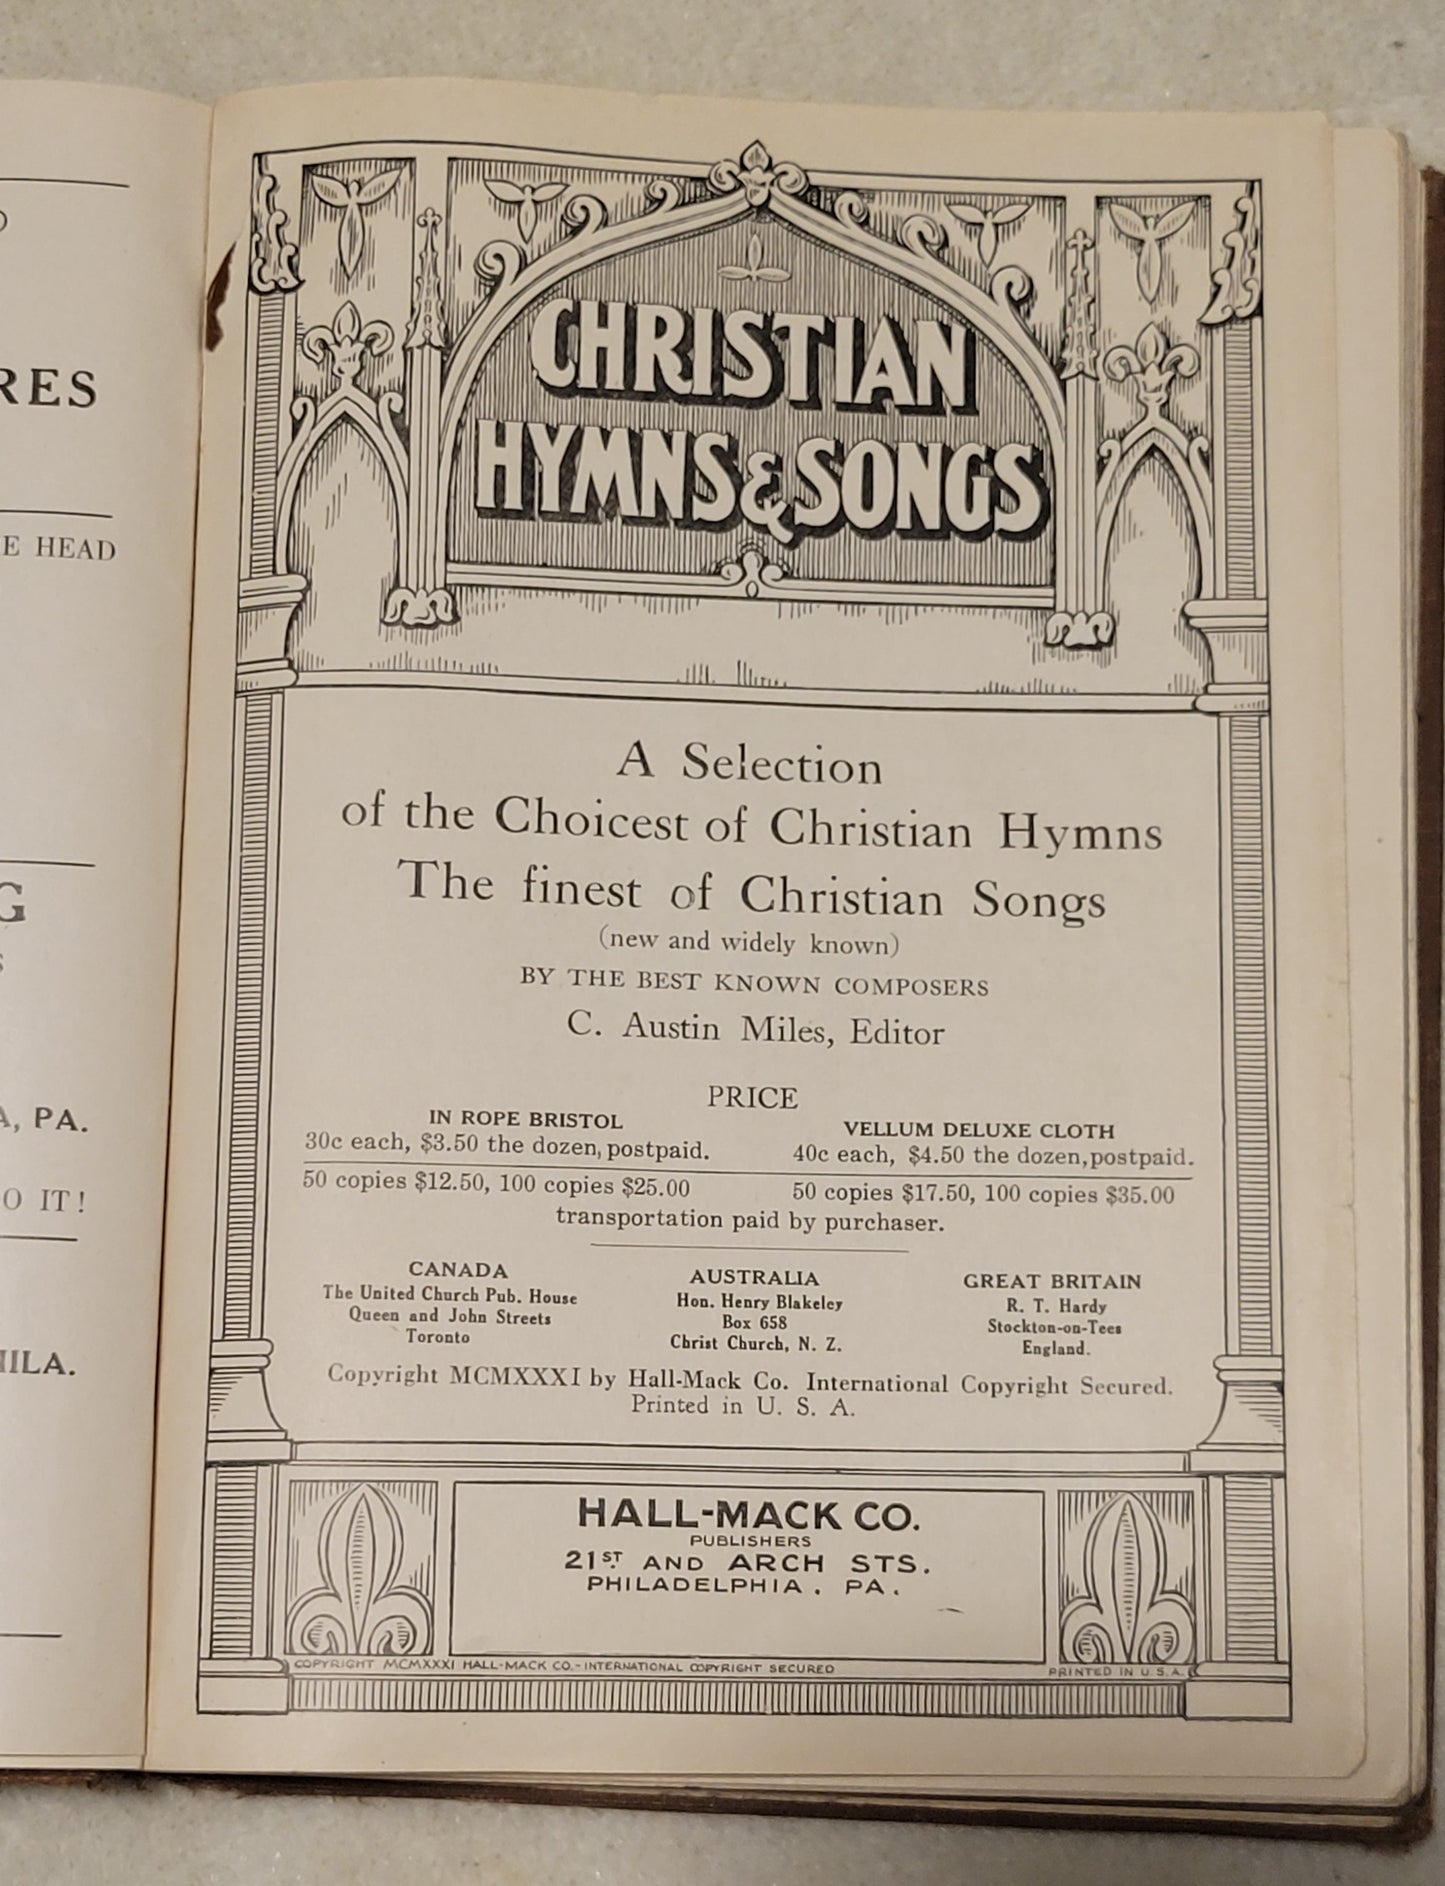 An antique book of Christian hymns and songs, published by Hall-Mack Co in Philadelphia in 1931.  View of inside title page.